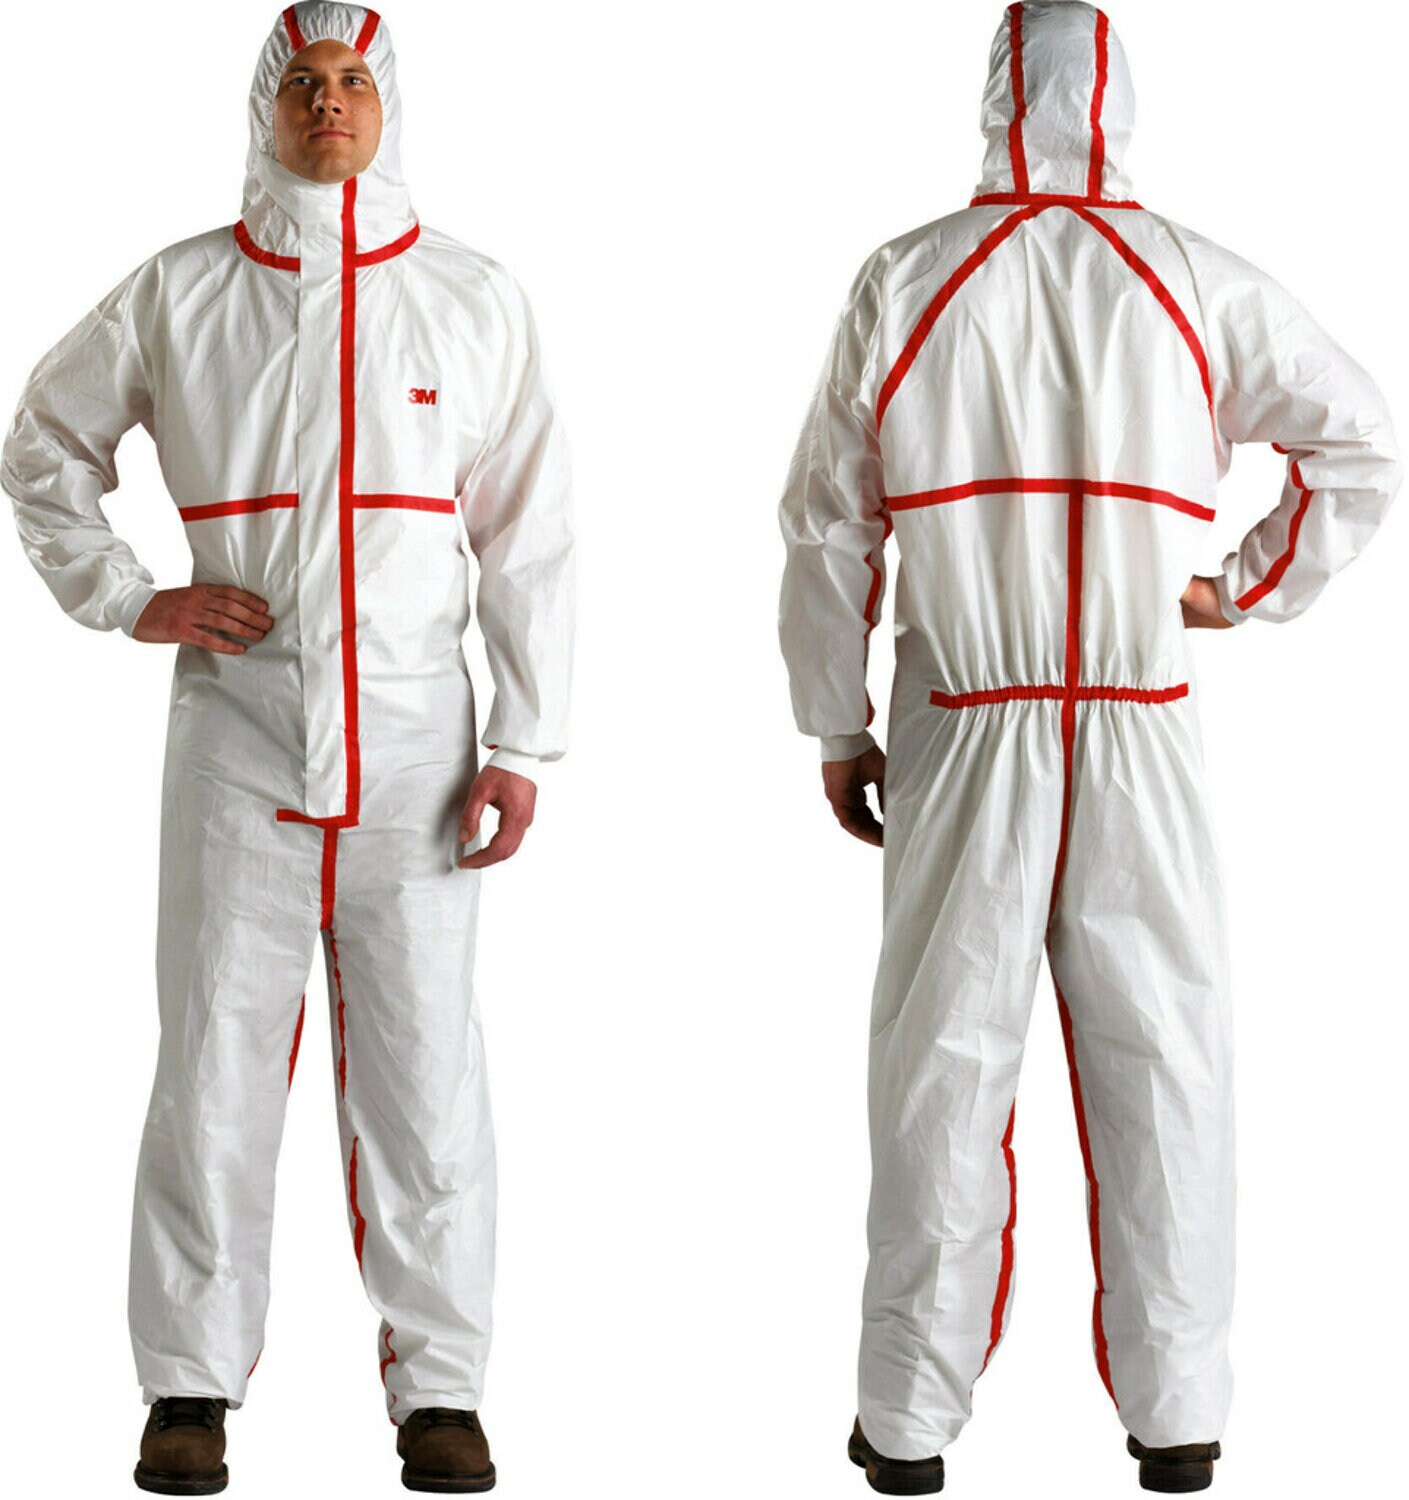 7000109050 - 3M Disposable Chemical Protective Coverall 4565-BLK-3XL, 25 EA/Case